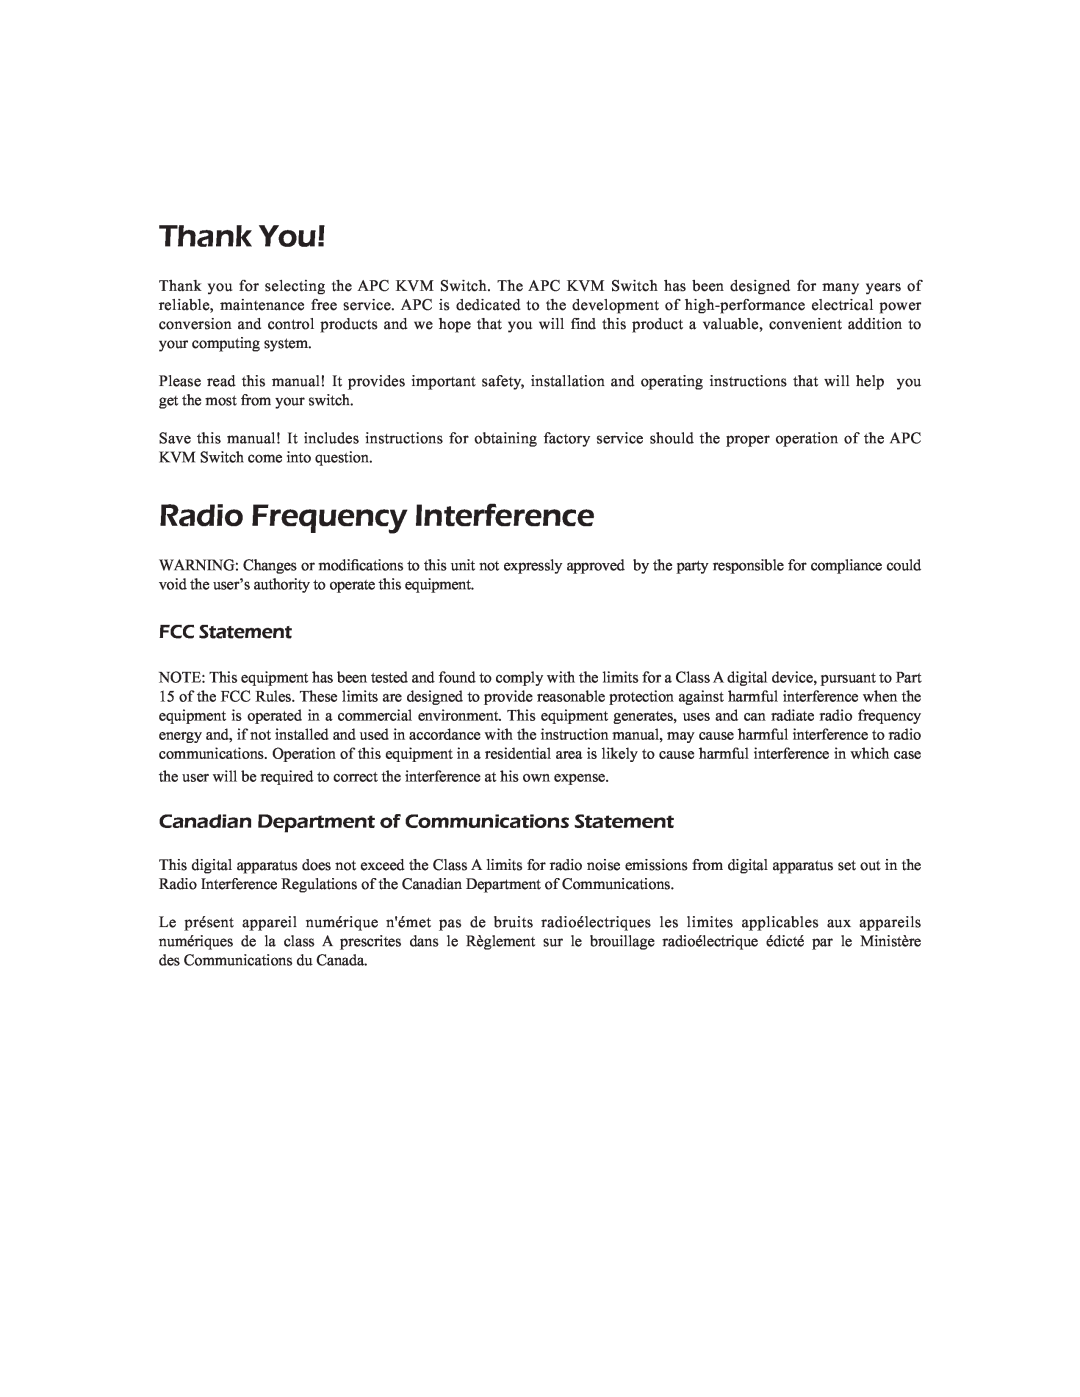 APC AP9268 manual FCC Statement, Canadian Department of Communications Statement, Thank You, Radio Frequency Interference 